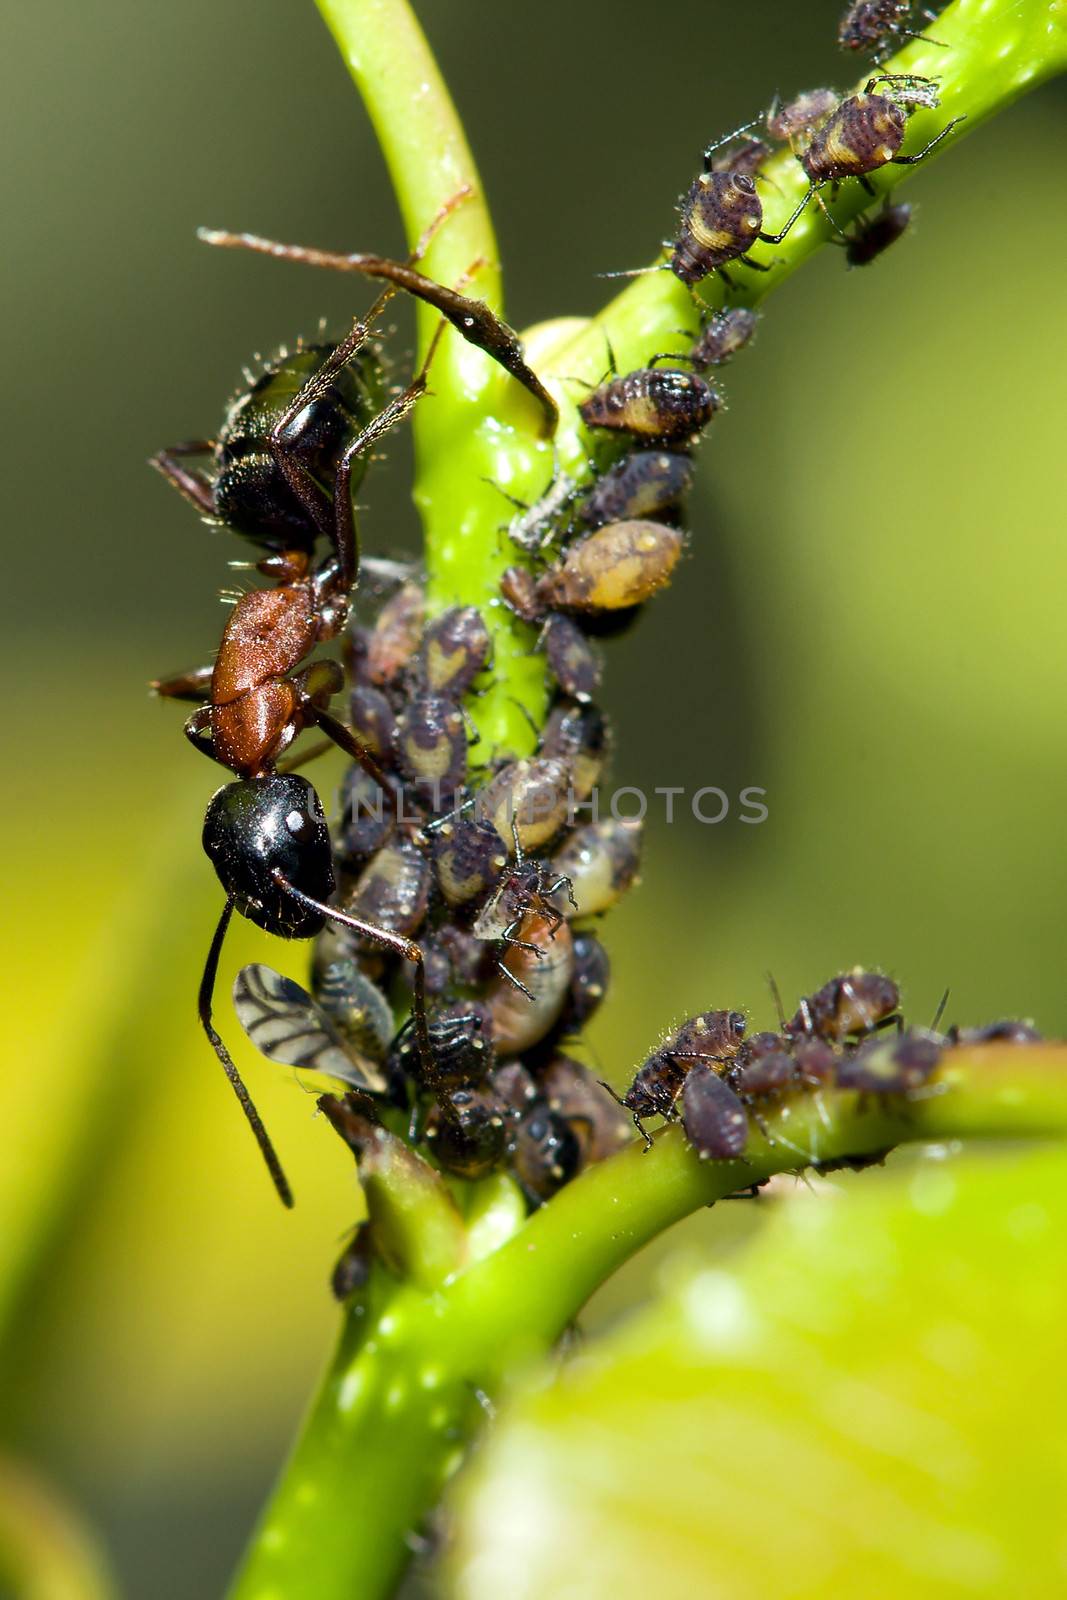 A Bull Ant keeping the aphids in check in HDR.